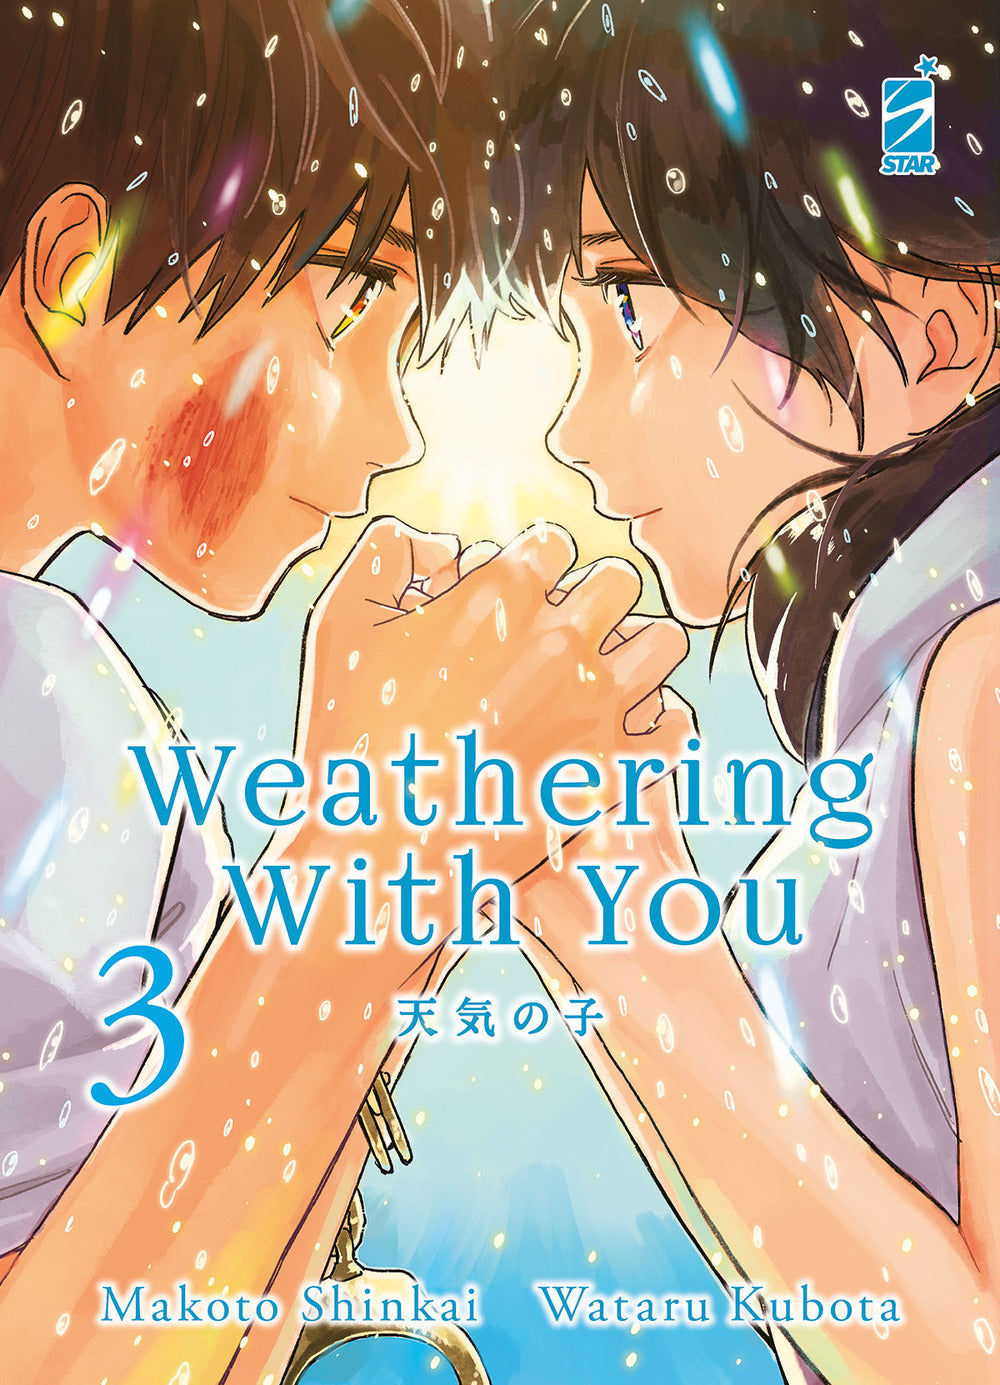 Weathering with you. Vol. 3.